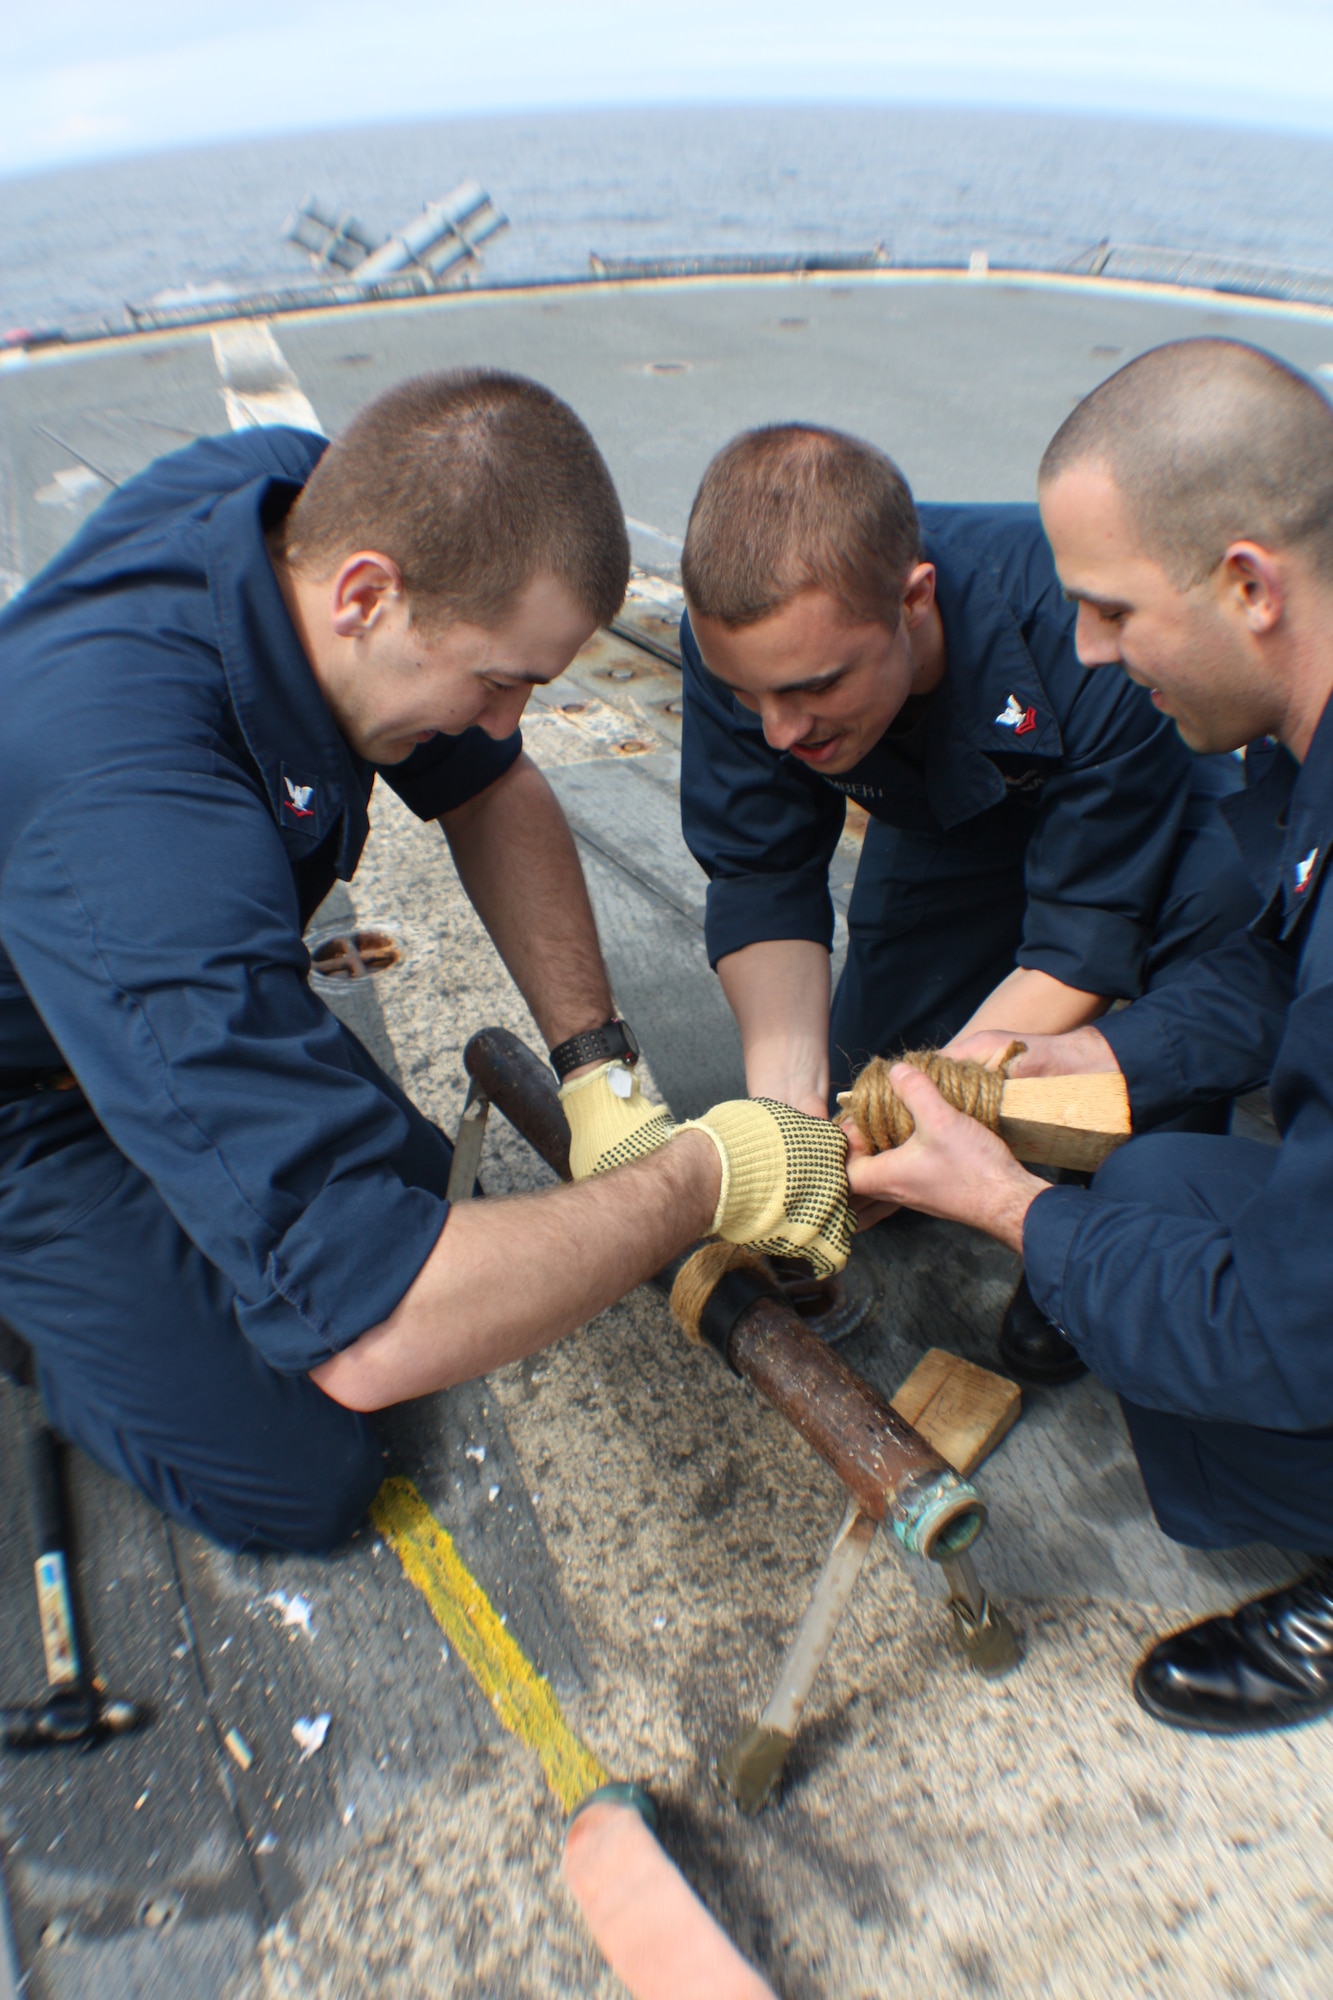 GULF OF ALASKA -- A pipe patching team races to seal a rupture in a pipe during the Damage Control Olympics aboard the guided-  cruiser USS Lake Erie (CG 70) June 19, 2011, in the Gulf of Alaska during Northern Edge 11. (U.S. Navy photo/Petty Officer 3rd Class Matthew Rodriguez)





